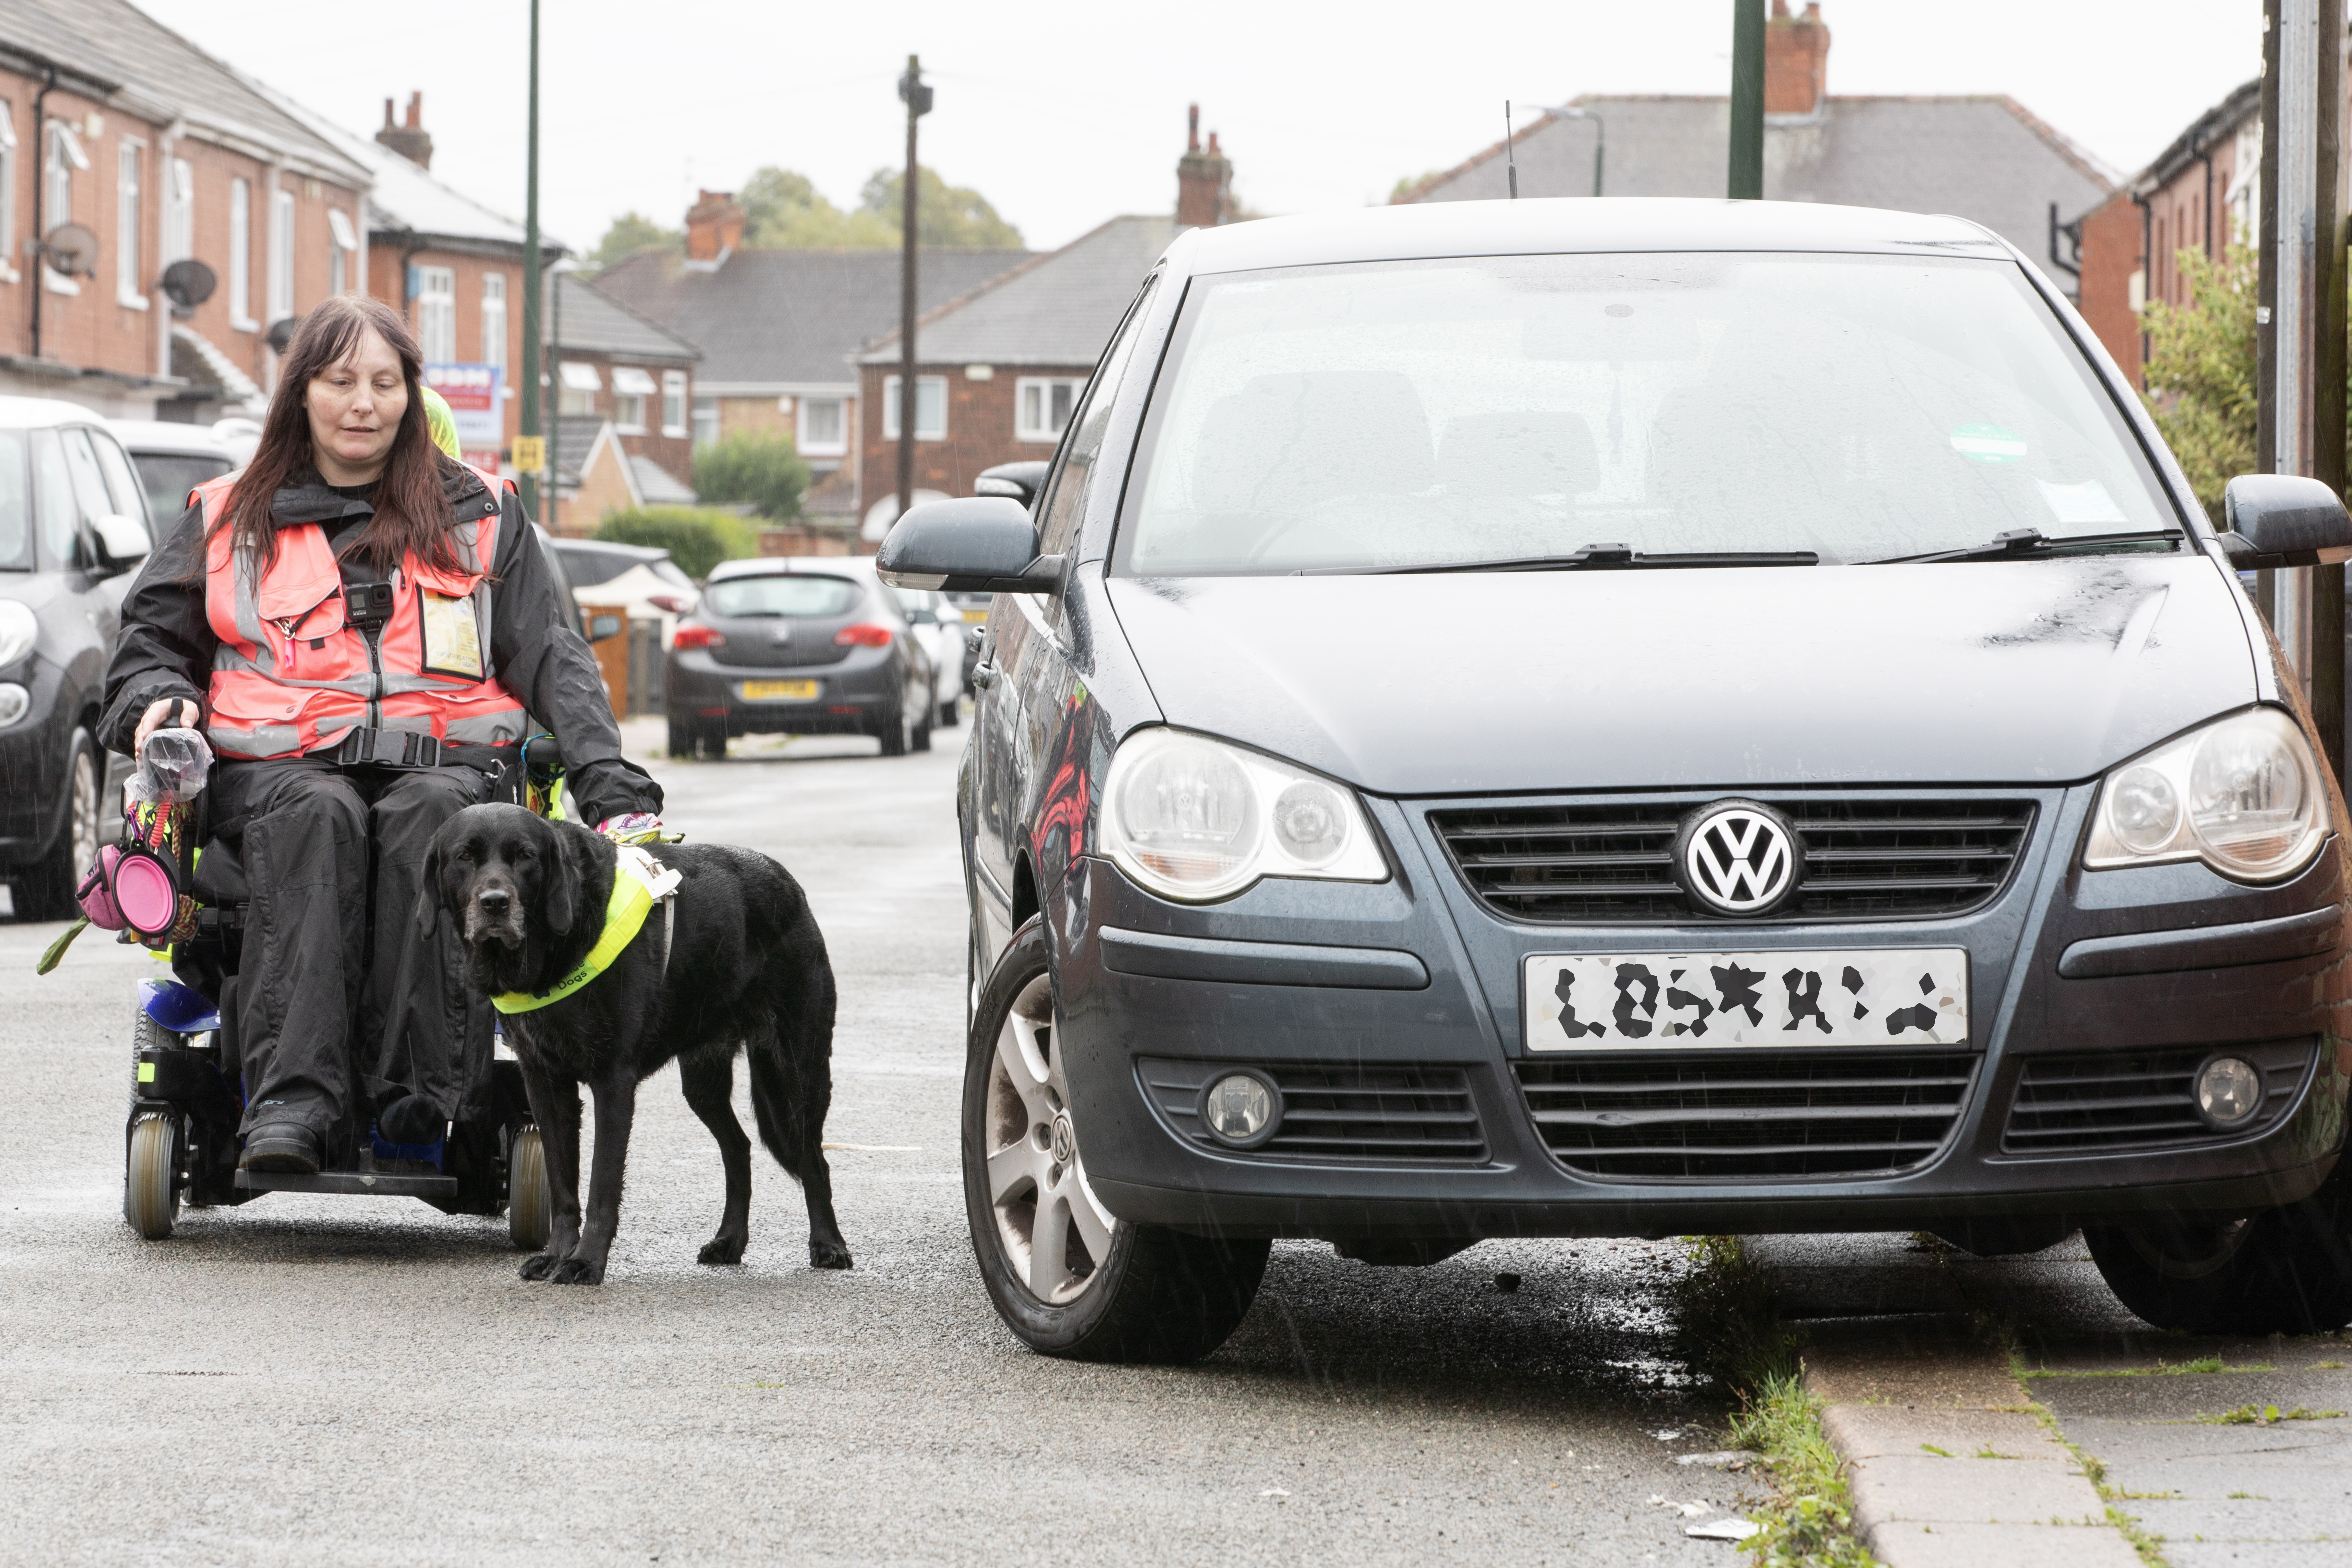 Power chair user Julie Pilsworth and her guide dog Maeve encountering pavement parking and having to pass a car in the road. 